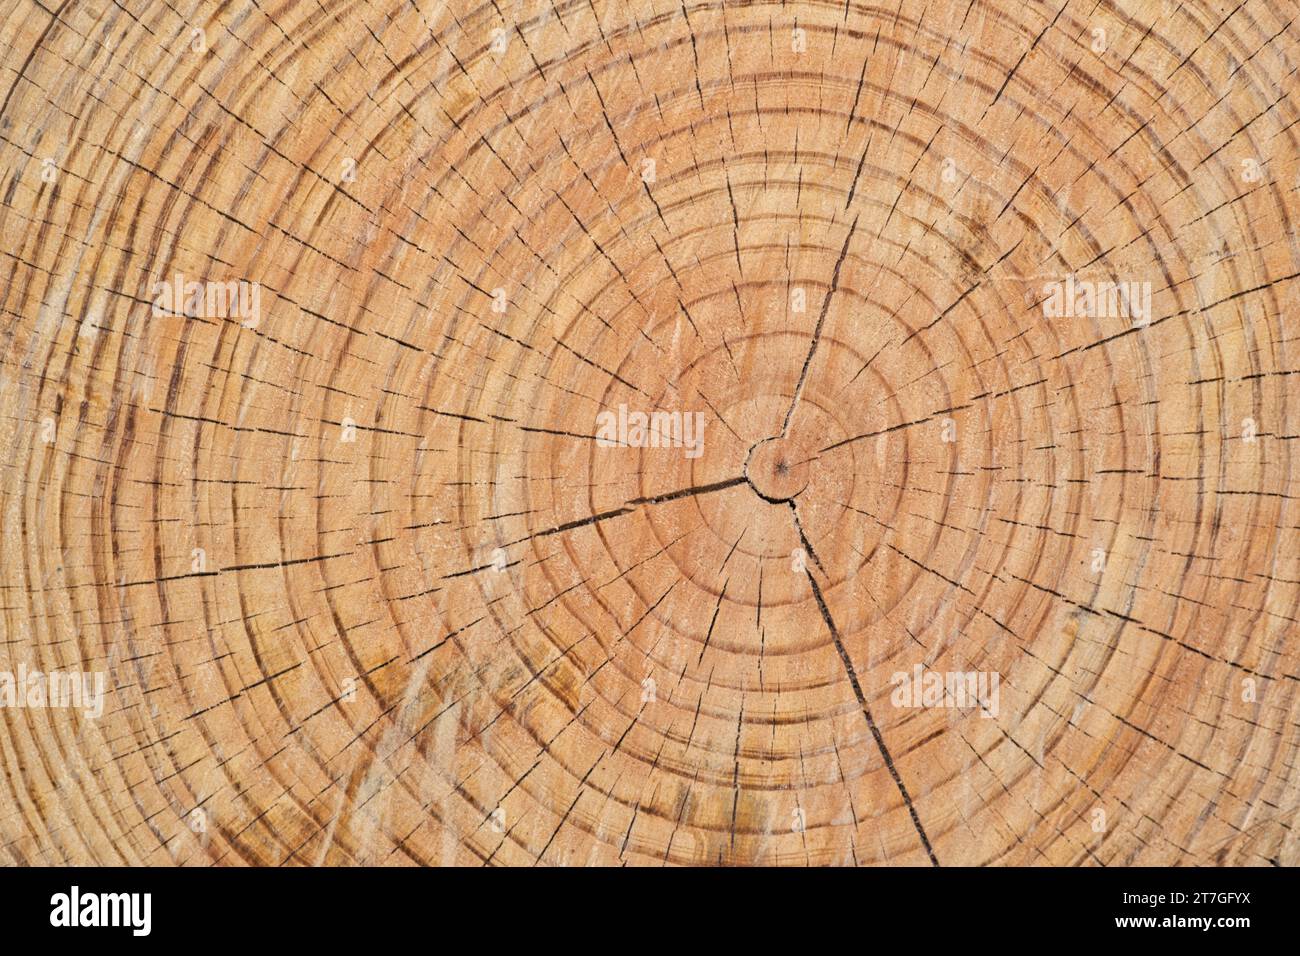 Tree rings cross section of a Bald Cypress (Taxodium distichum). Closeup detailed abstract background image. Stock Photo